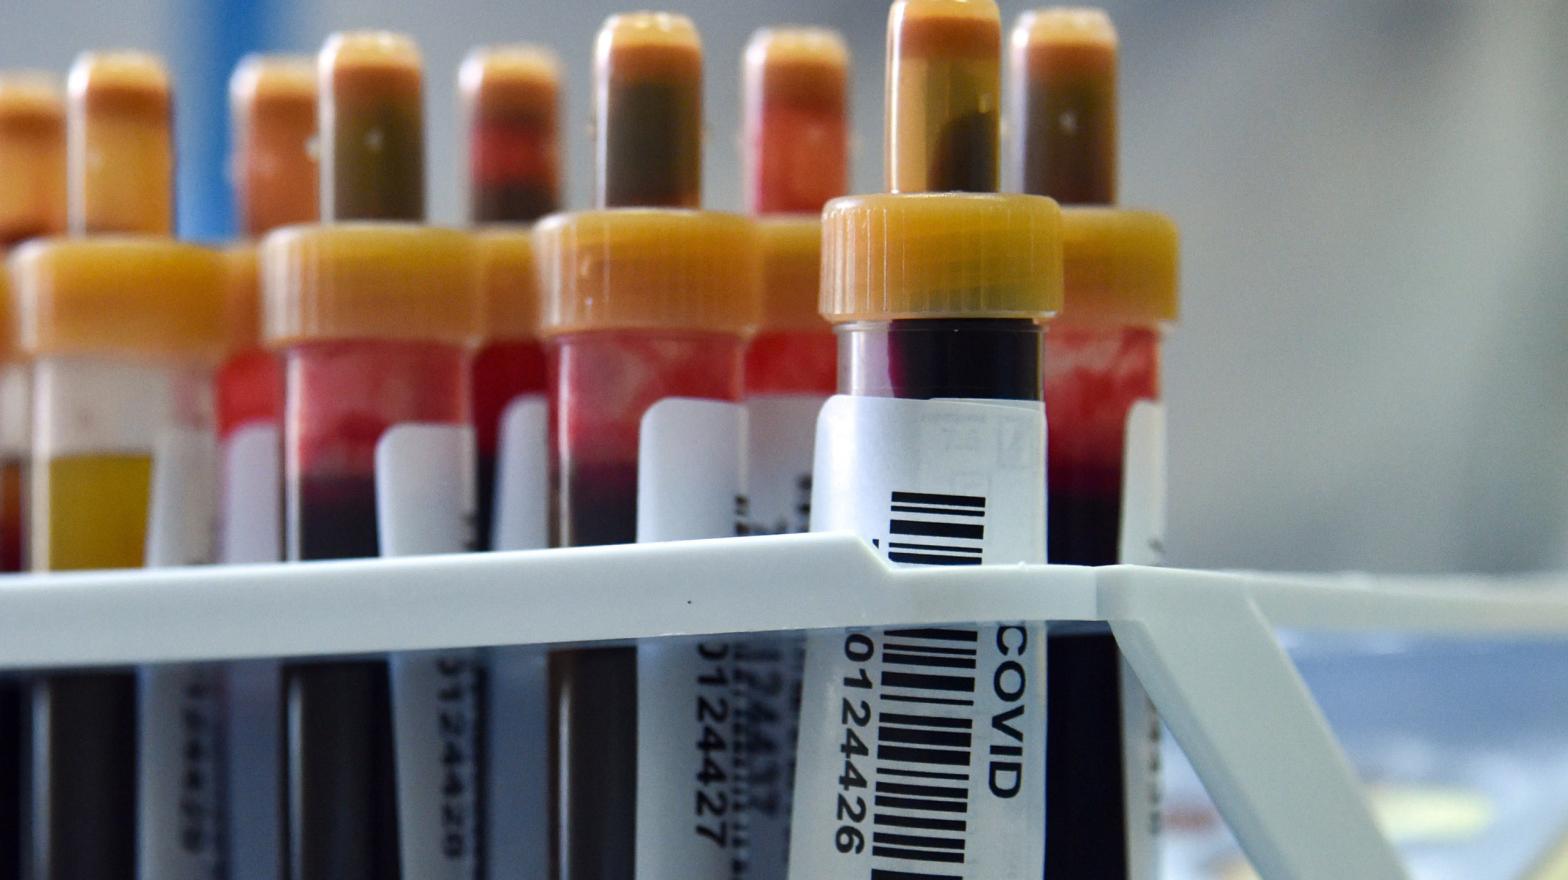 Blood samples about to be tested for covid-19 antibodies at a clinic in Moscow on May 15, 2020 (Photo: Vasily Maximov, Getty Images)